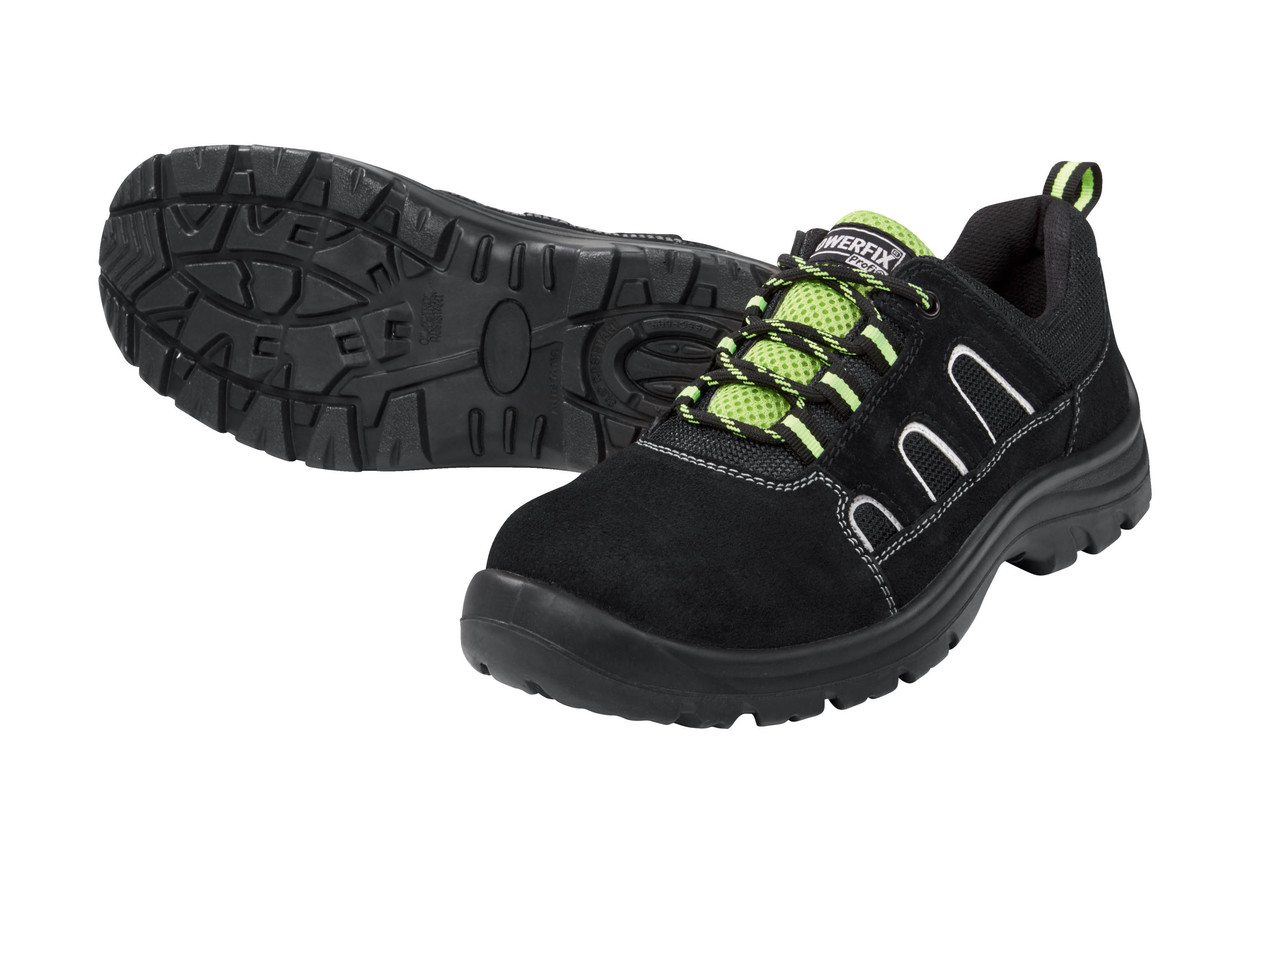 POWERFIX S1 Men's Leather Safety Shoes